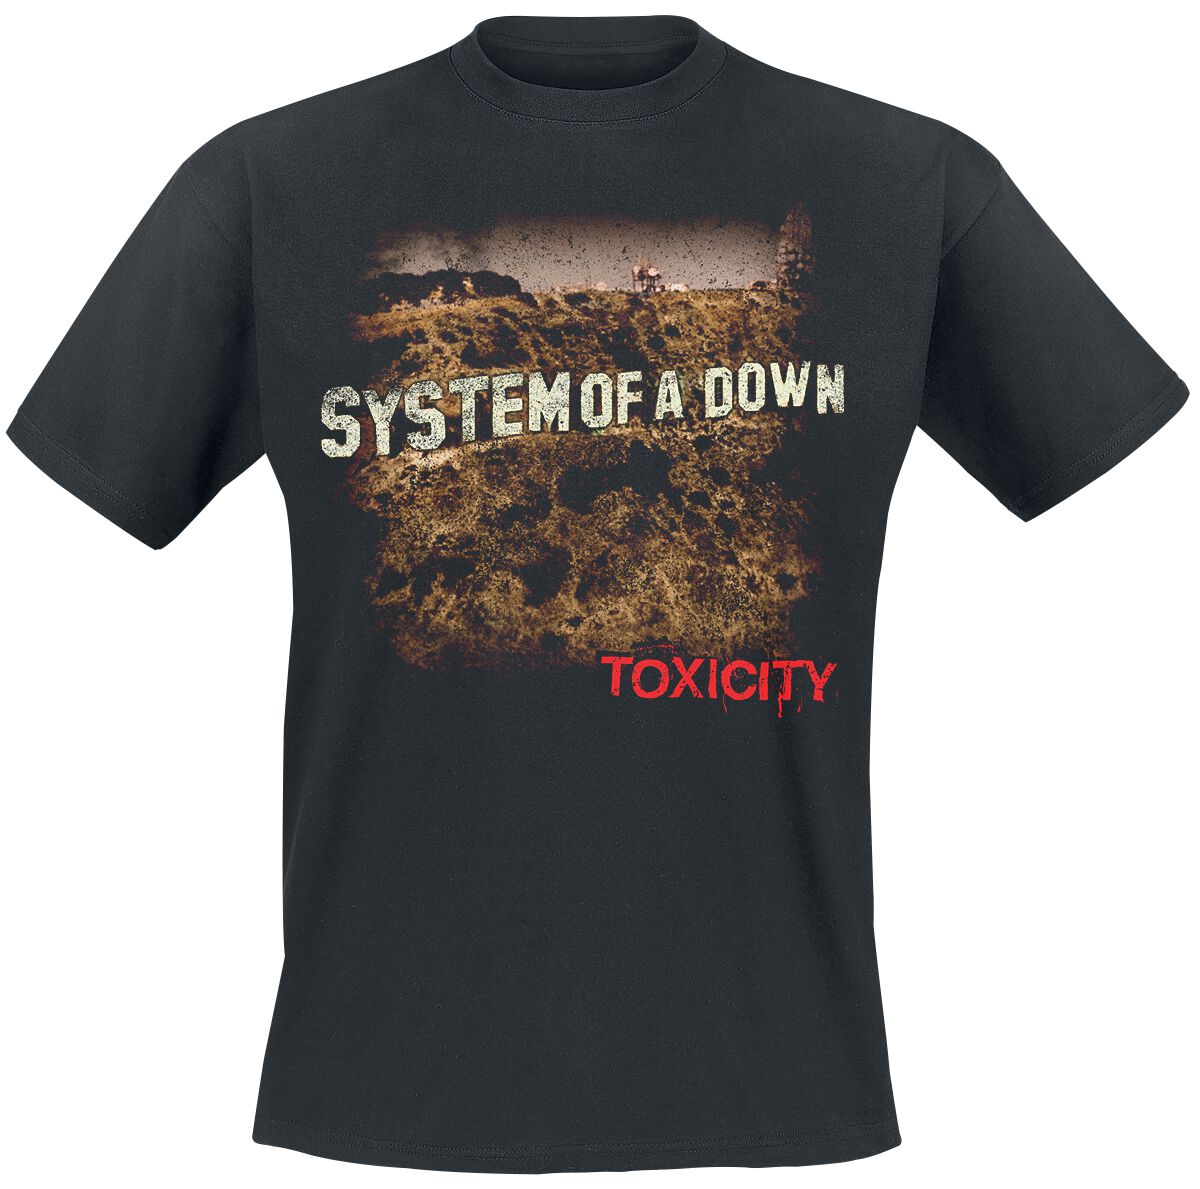 System Of A Down Toxicity T-Shirt schwarz in S